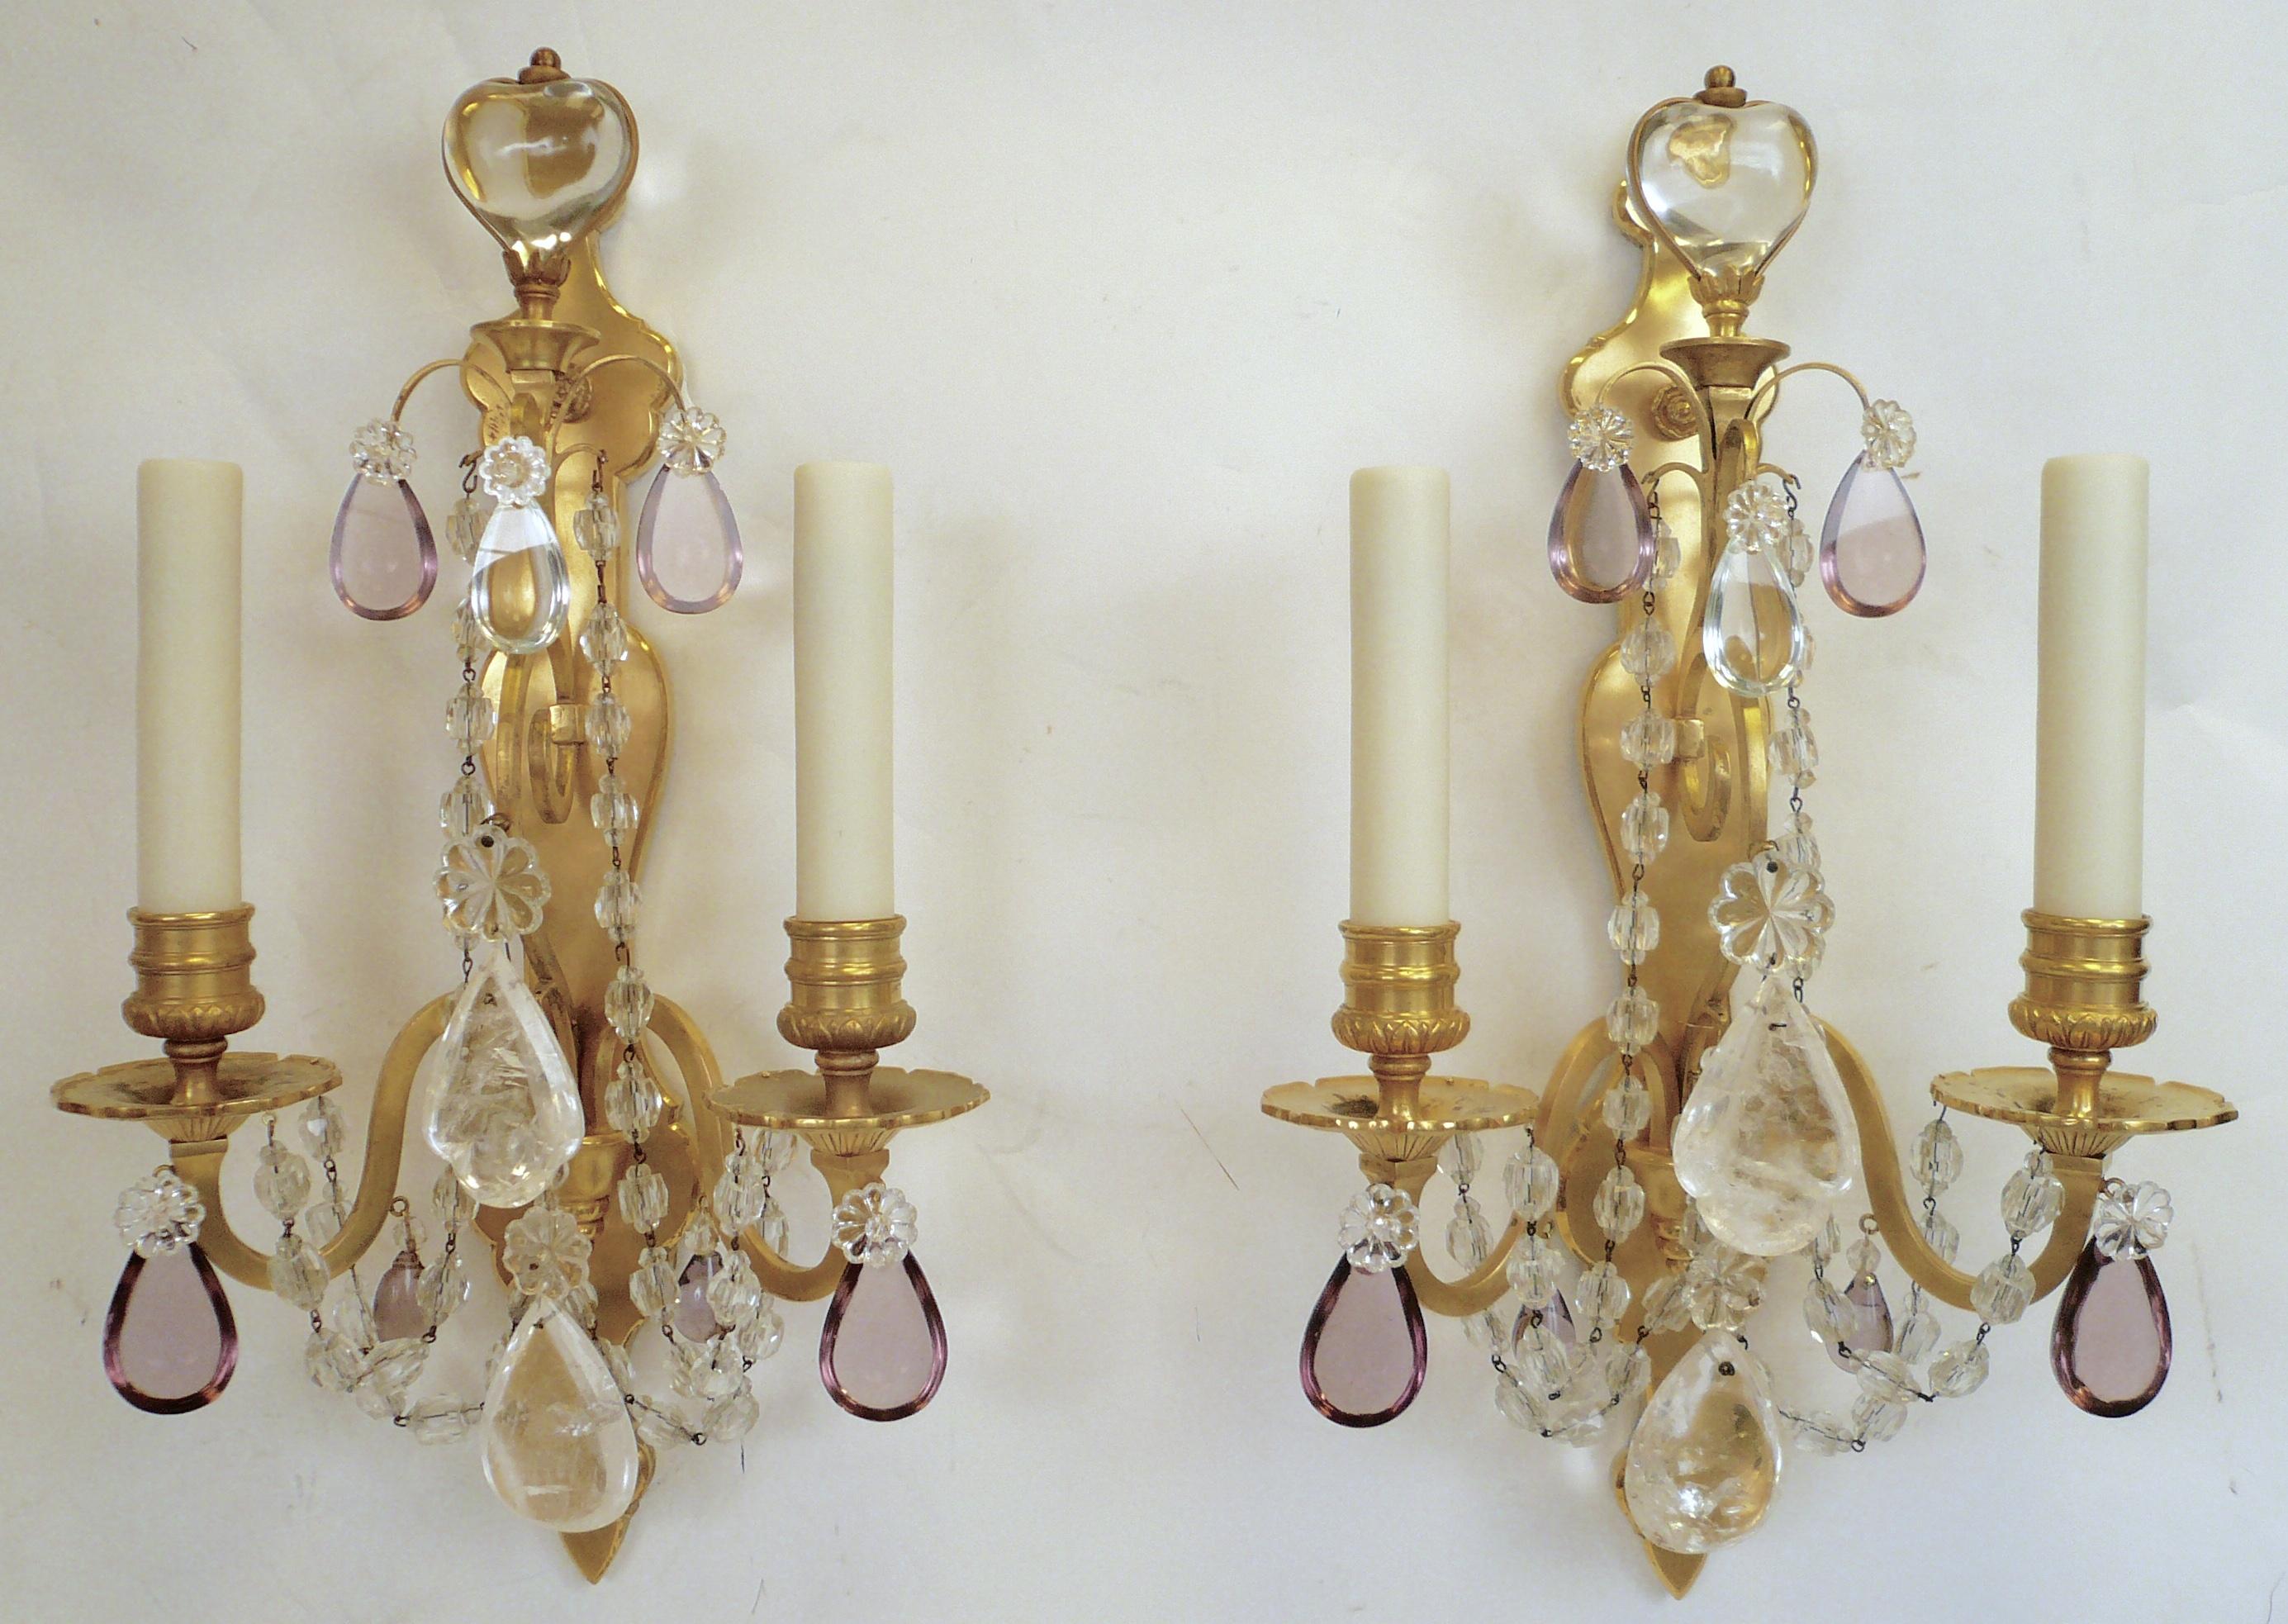 Pair of French Gilt Bronze Sconces with Rock Crystal and Amethyst Prisms For Sale 7